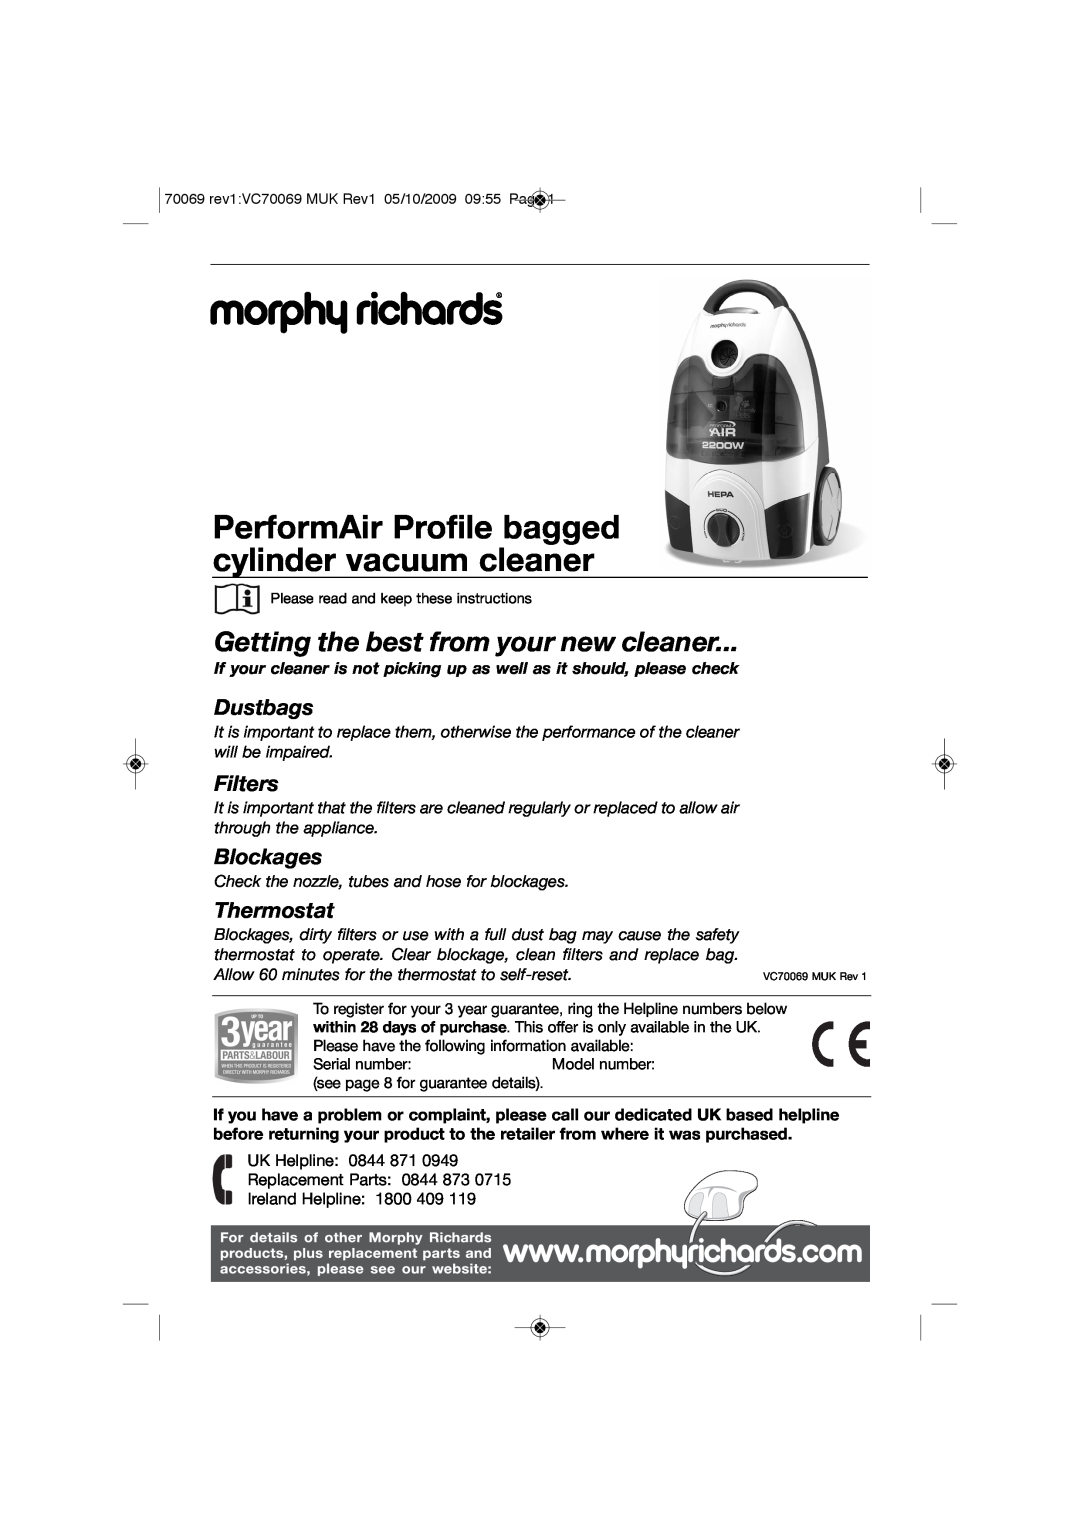 Morphy Richards VC70069 MUK manual PerformAir Profile bagged cylinder vacuum cleaner, Dustbags, Filters, Blockages 